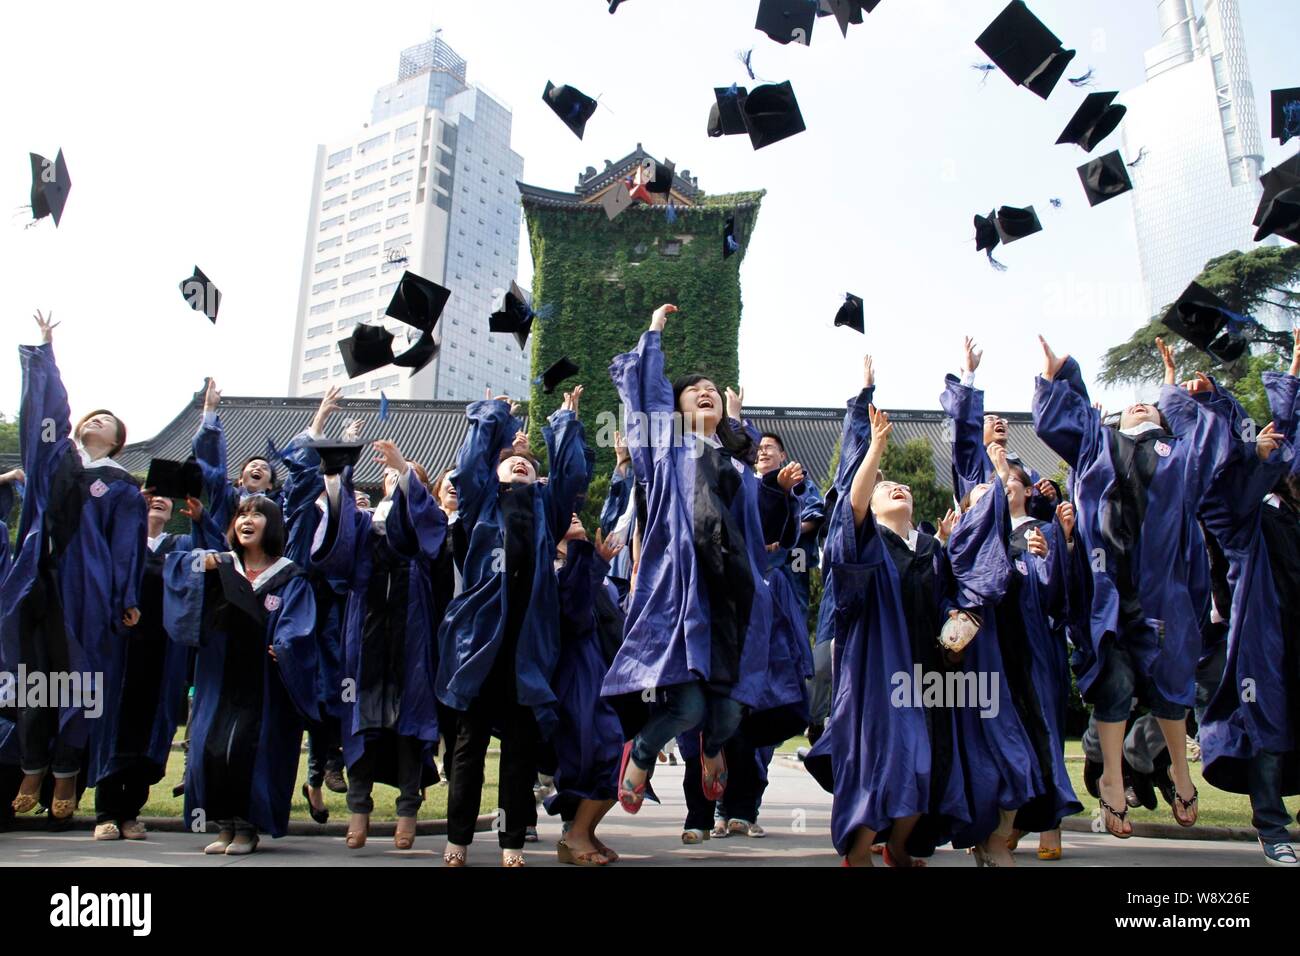 --FILE--Chinese graduates dressed in academic gowns throw their hats into the air during a graduation ceremony at Nanjing Unviersity in Nanjing city, Stock Photo